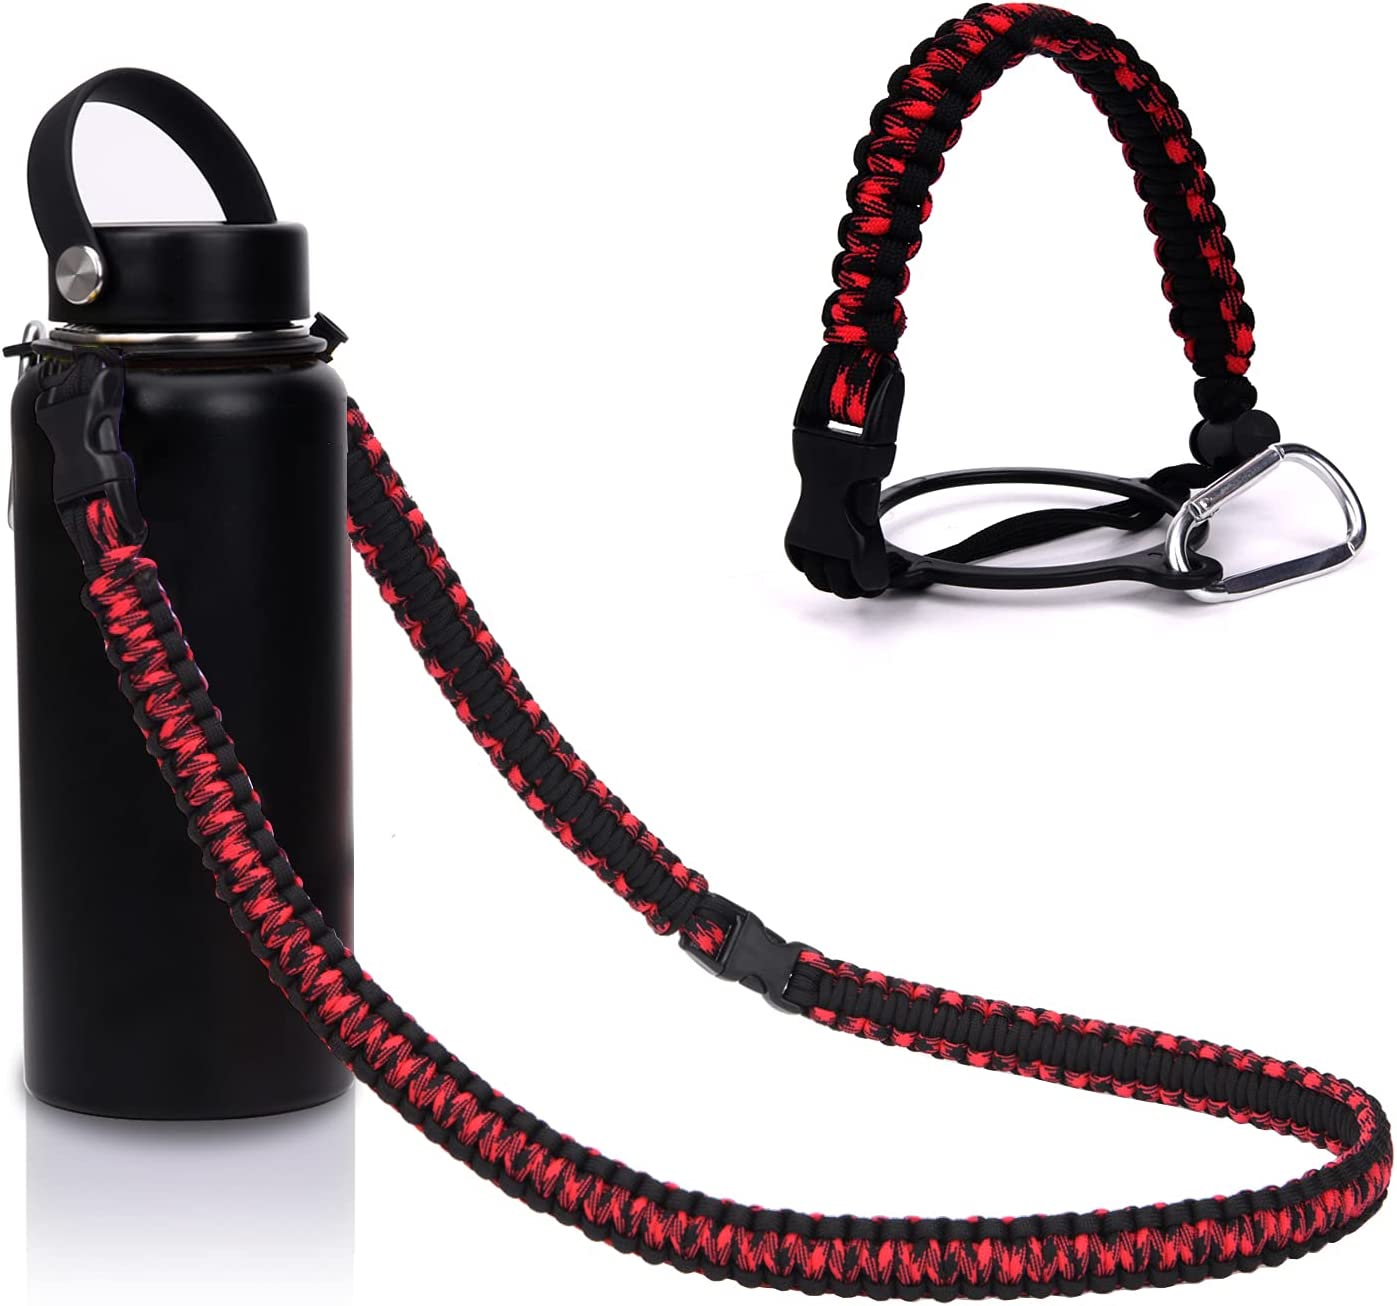 Paracord Handle - Fits Wide Mouth Bottles 12oz to 64oz - Durable Carrier,  Paracord Carrier Strap Cord with Safety Ring,Compass and Carabiner - Ideal  Water Bottle Handle Strap LvBai 